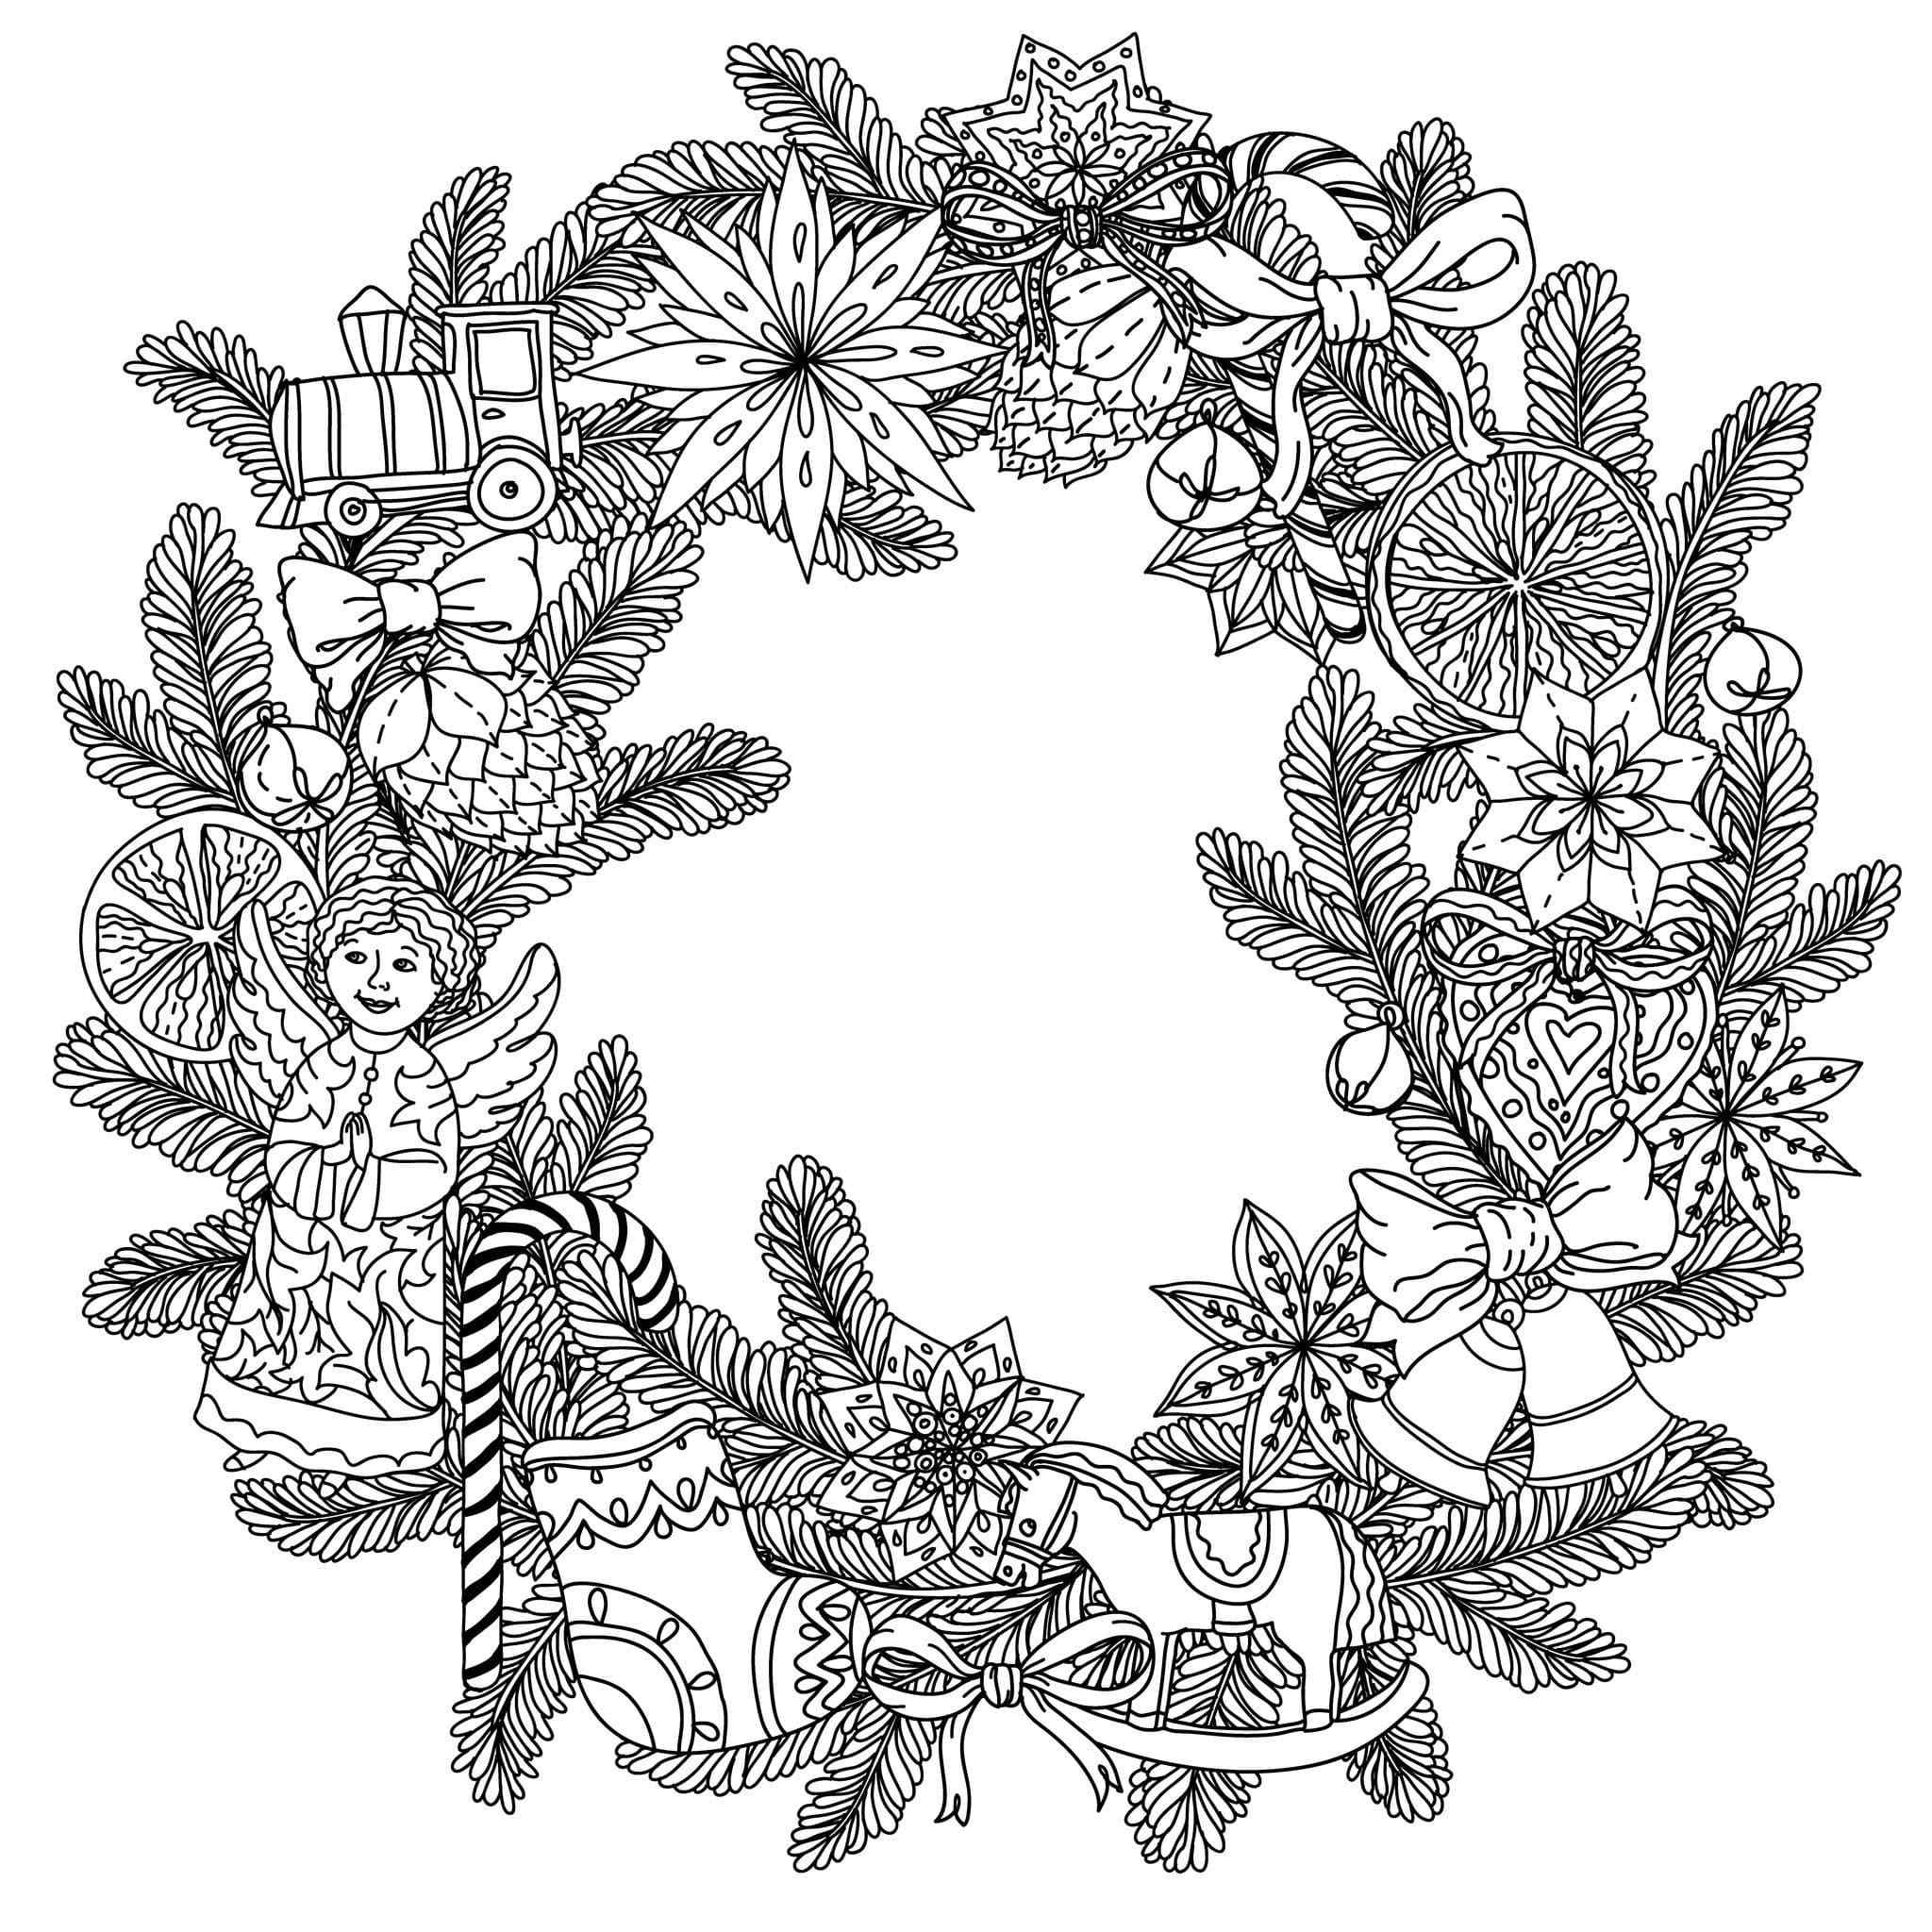 A Wreath Of Spruce Branches